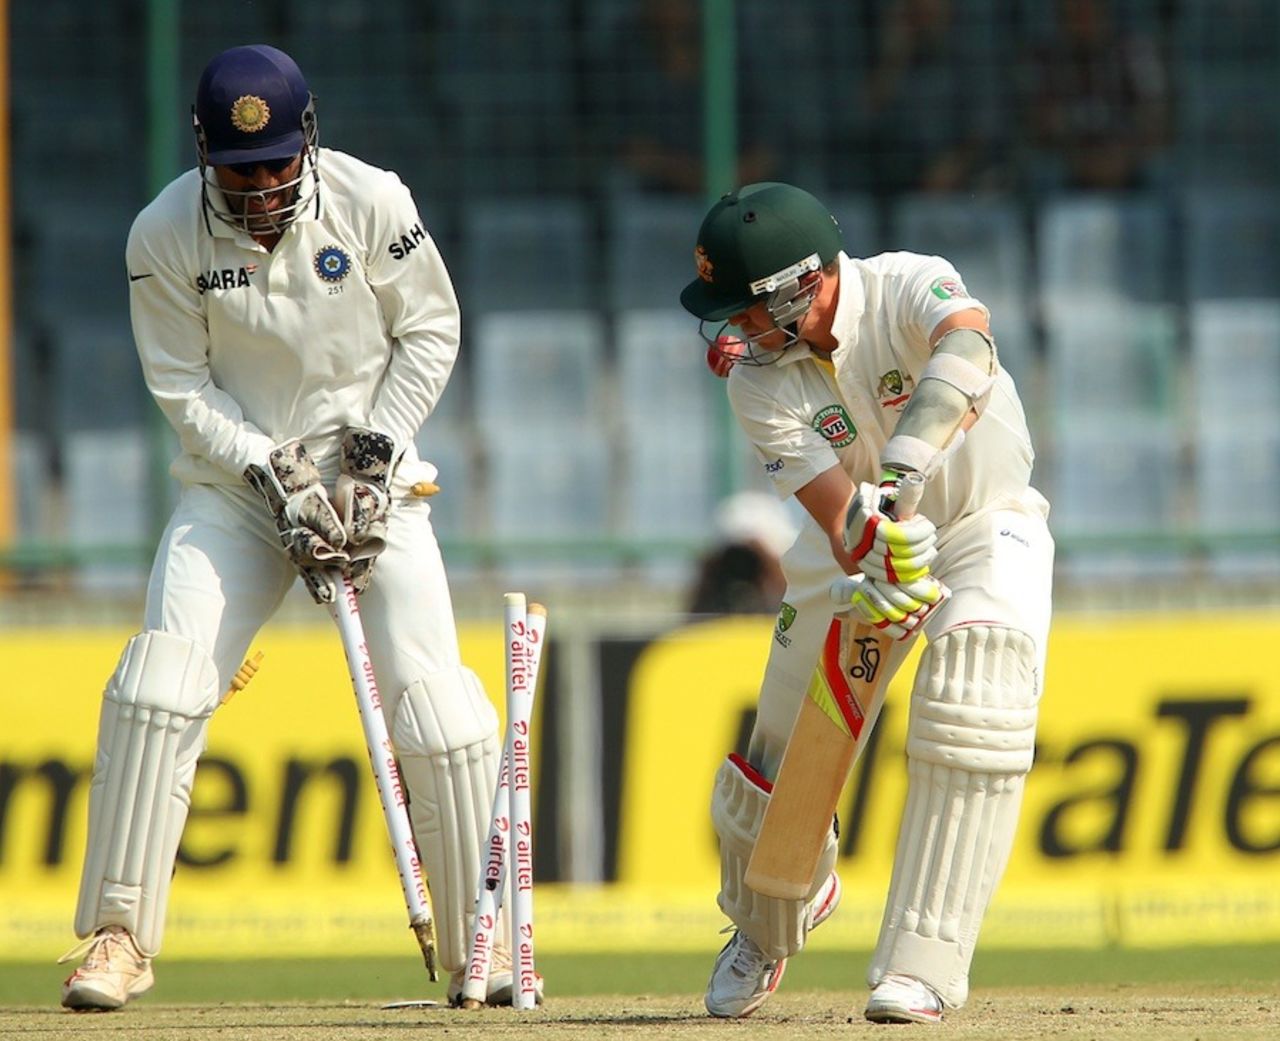 Peter Siddle was bowled for 51, India v Australia, 4th Test, Delhi, 2nd day, March 23, 2012